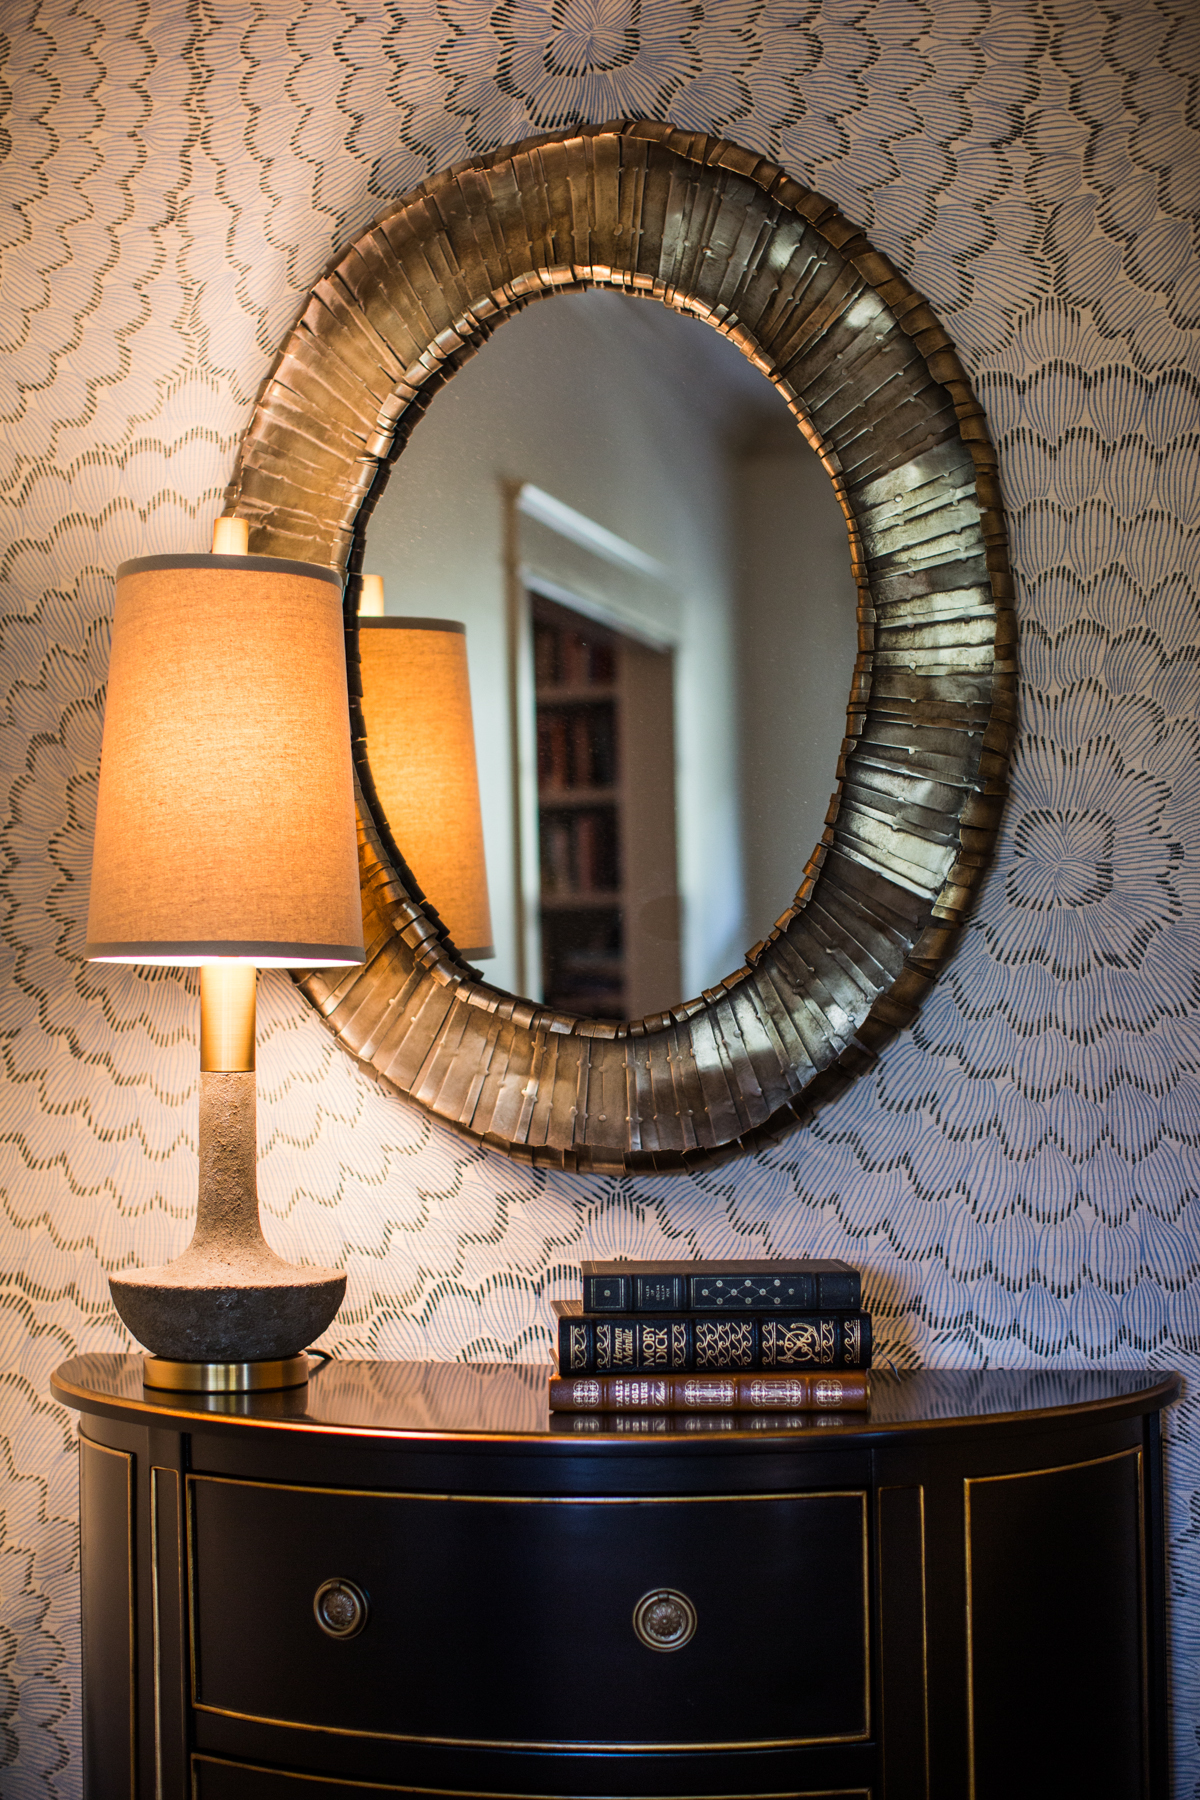 Fold textured mirror. Neutral wallpaper with fun design. Black antique side table